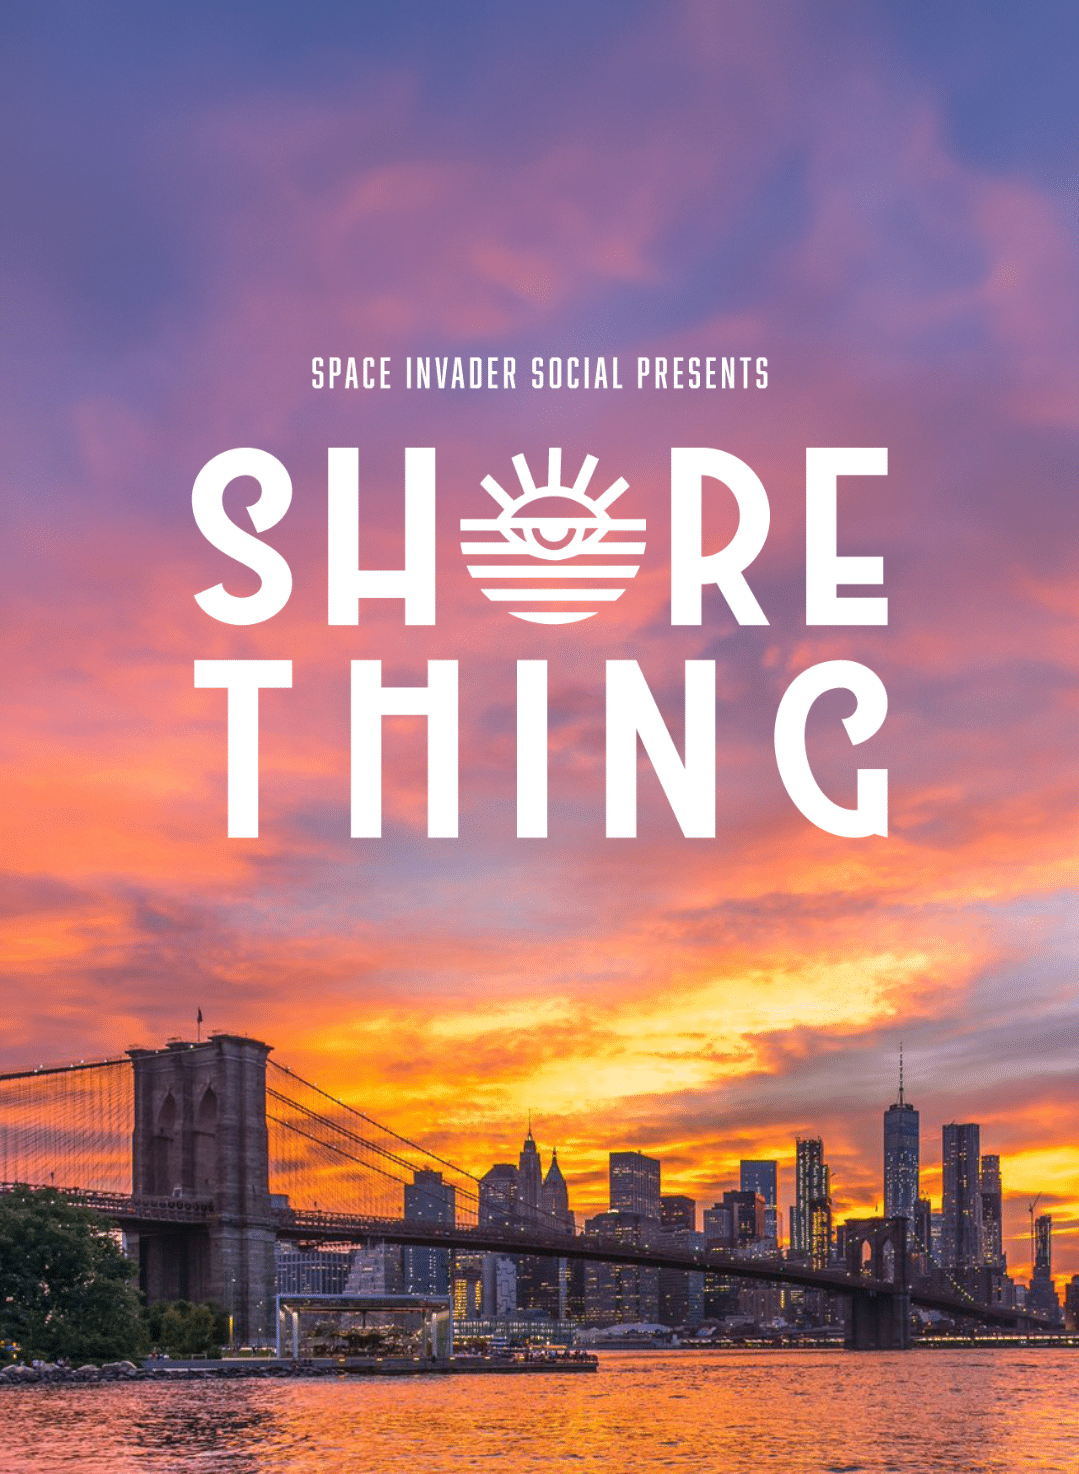 Shore Thing with sunset and Brooklyn Bridge photo